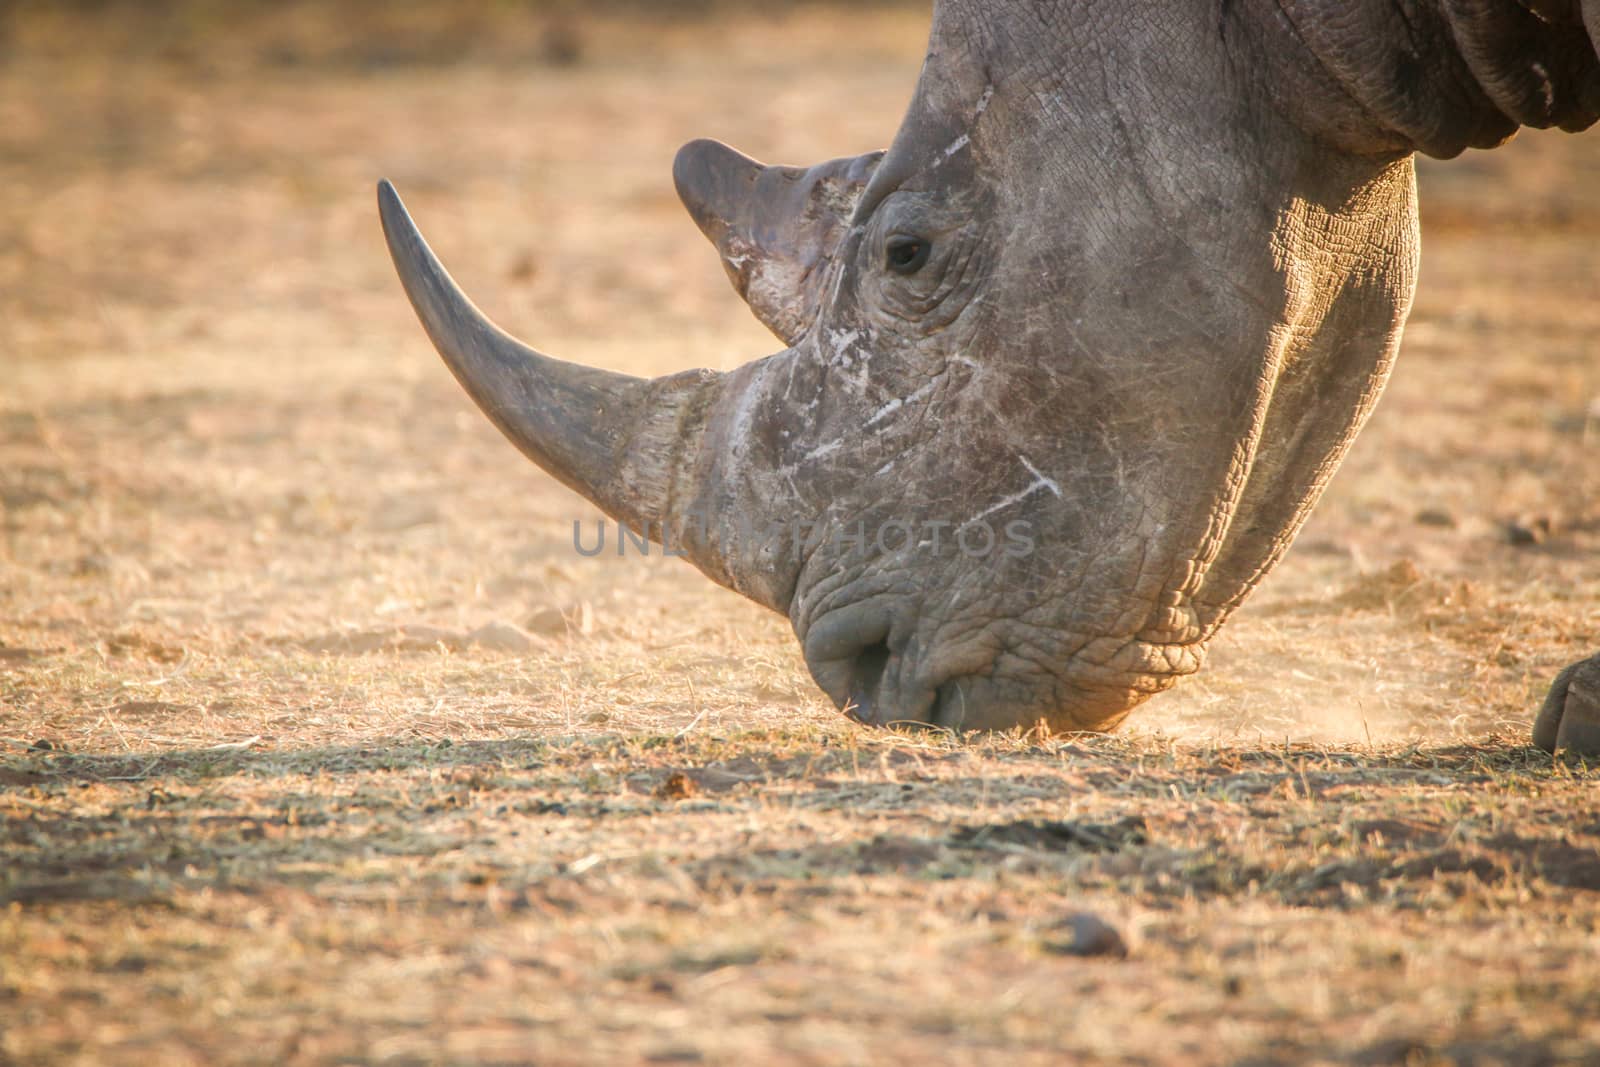 Close up of a White rhino grazing, South Africa.